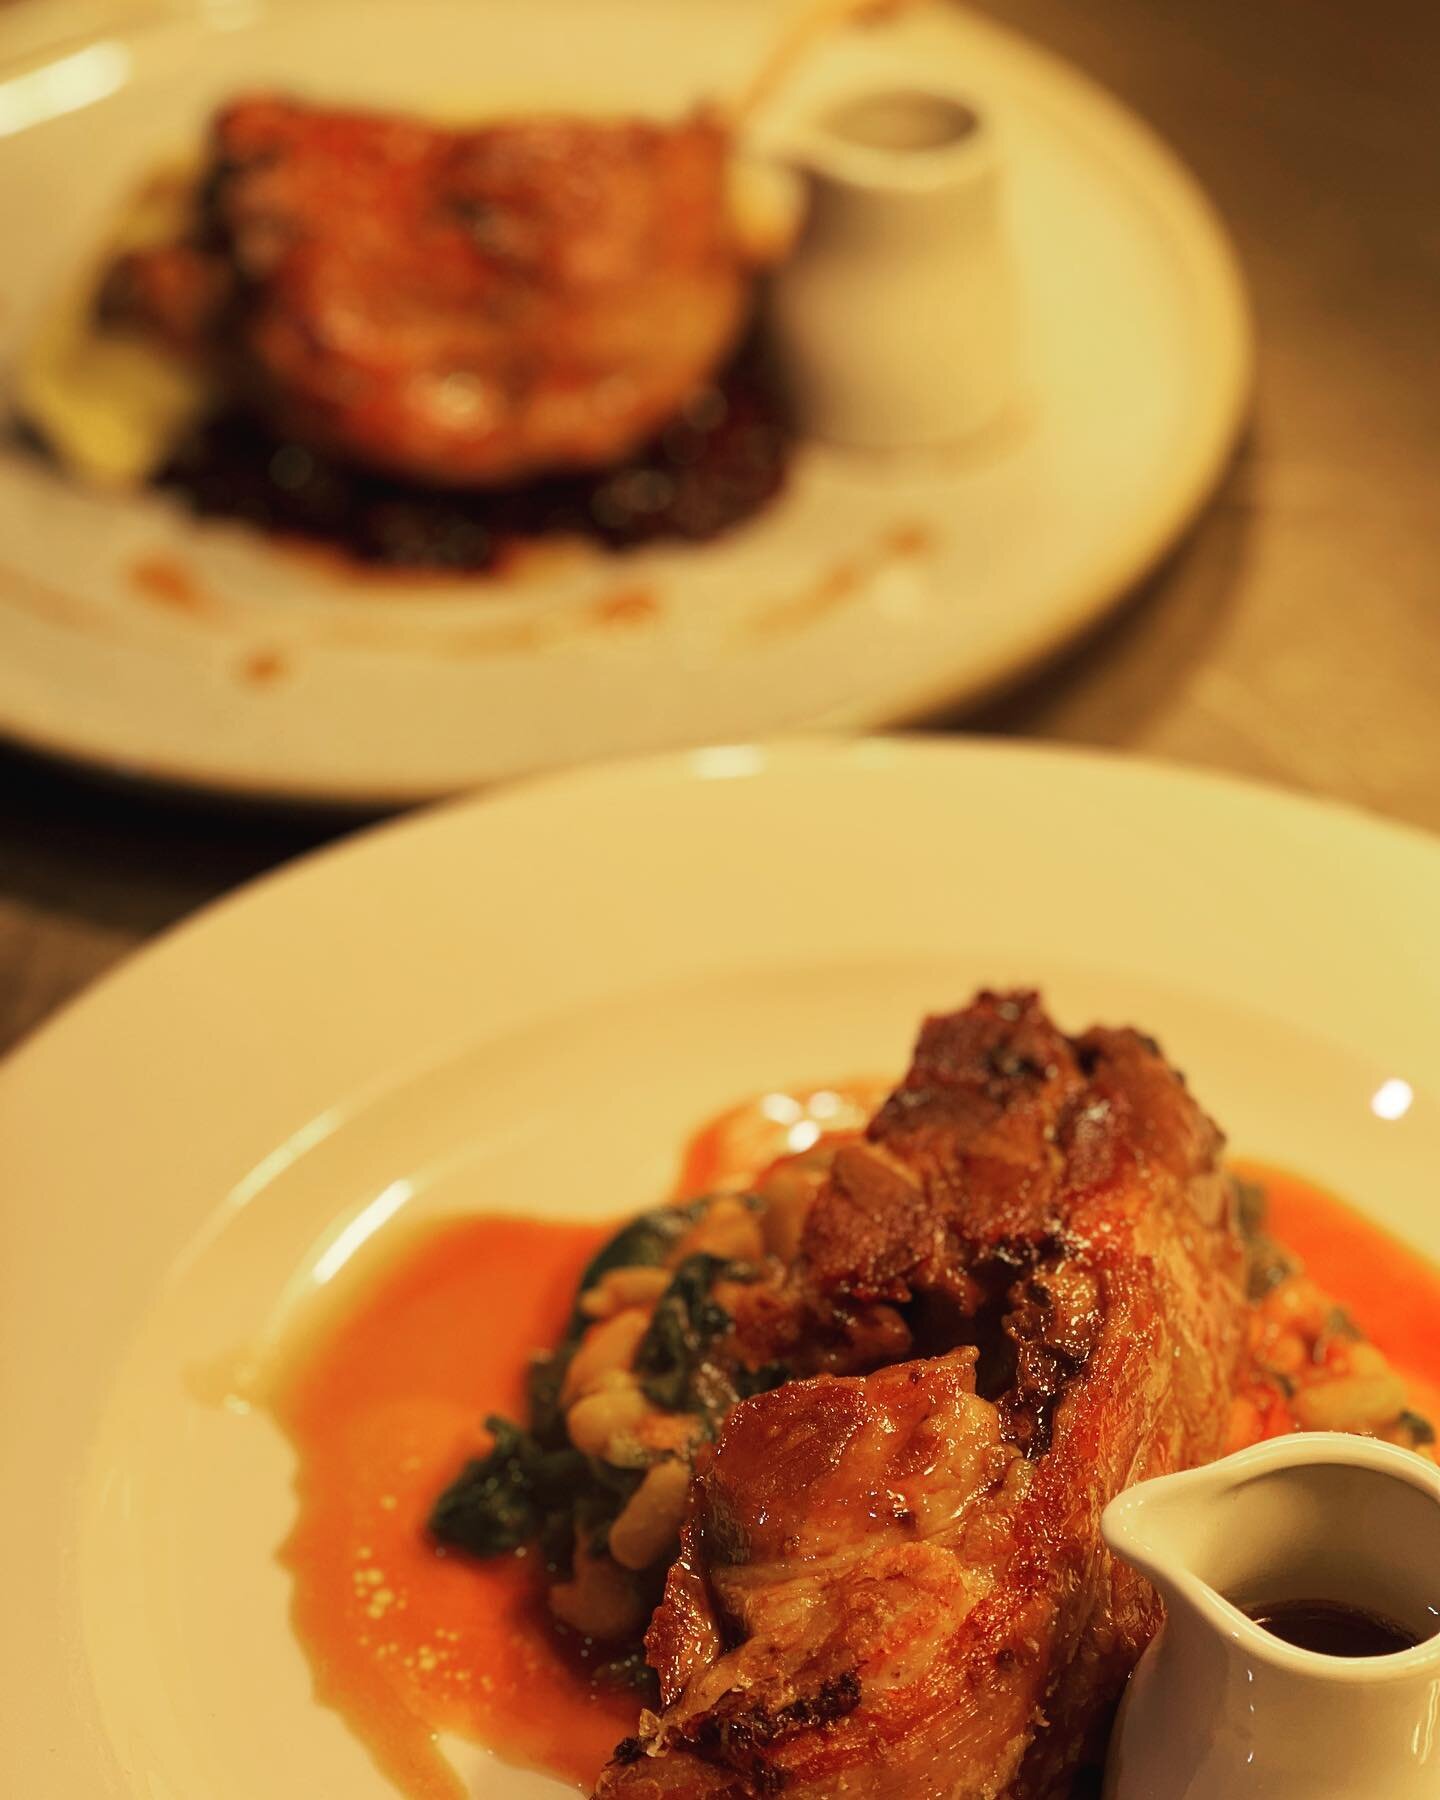 Confit Cotswold Lamb Shoulder.

#villagepub #pub #pubfood #food #foodie #chef #michelinguide #yesmichelinguide #instafood #dinner #lunch #sundaylunch #lamb #goodfood